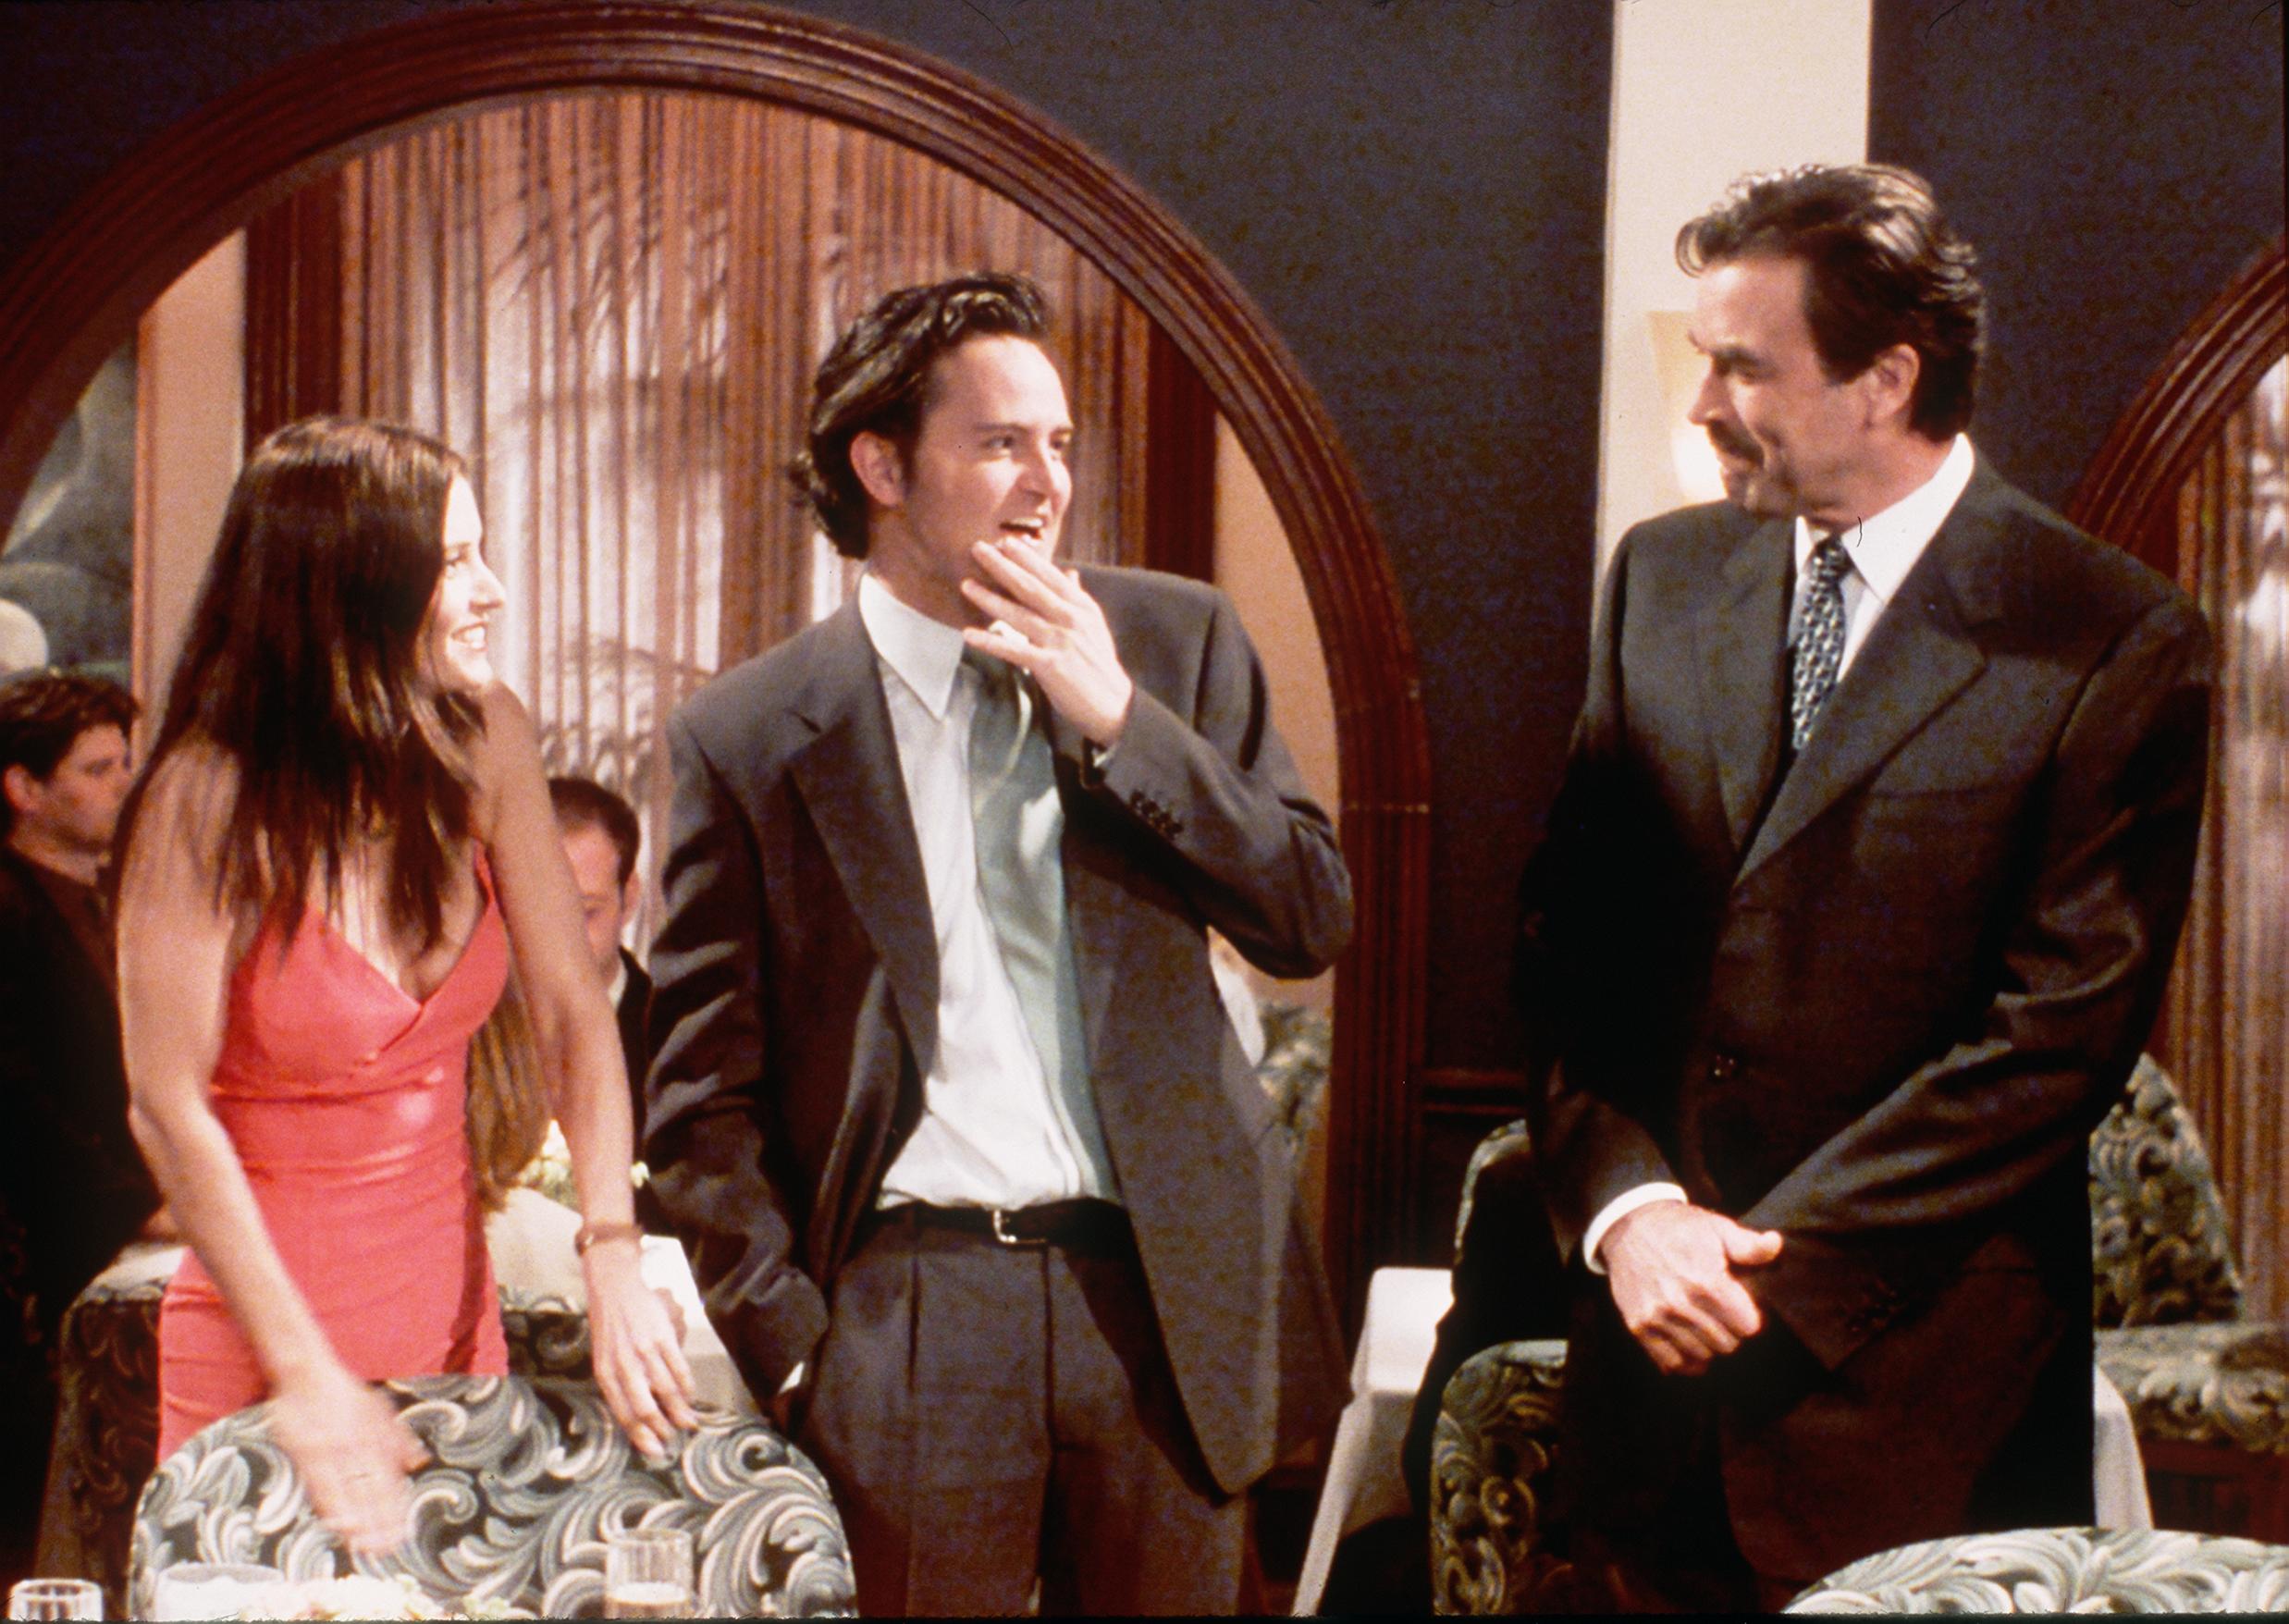 Monica and Chandler chat with Dr. Richard Burke in "The One With the Proposal" episode of 'Friends'